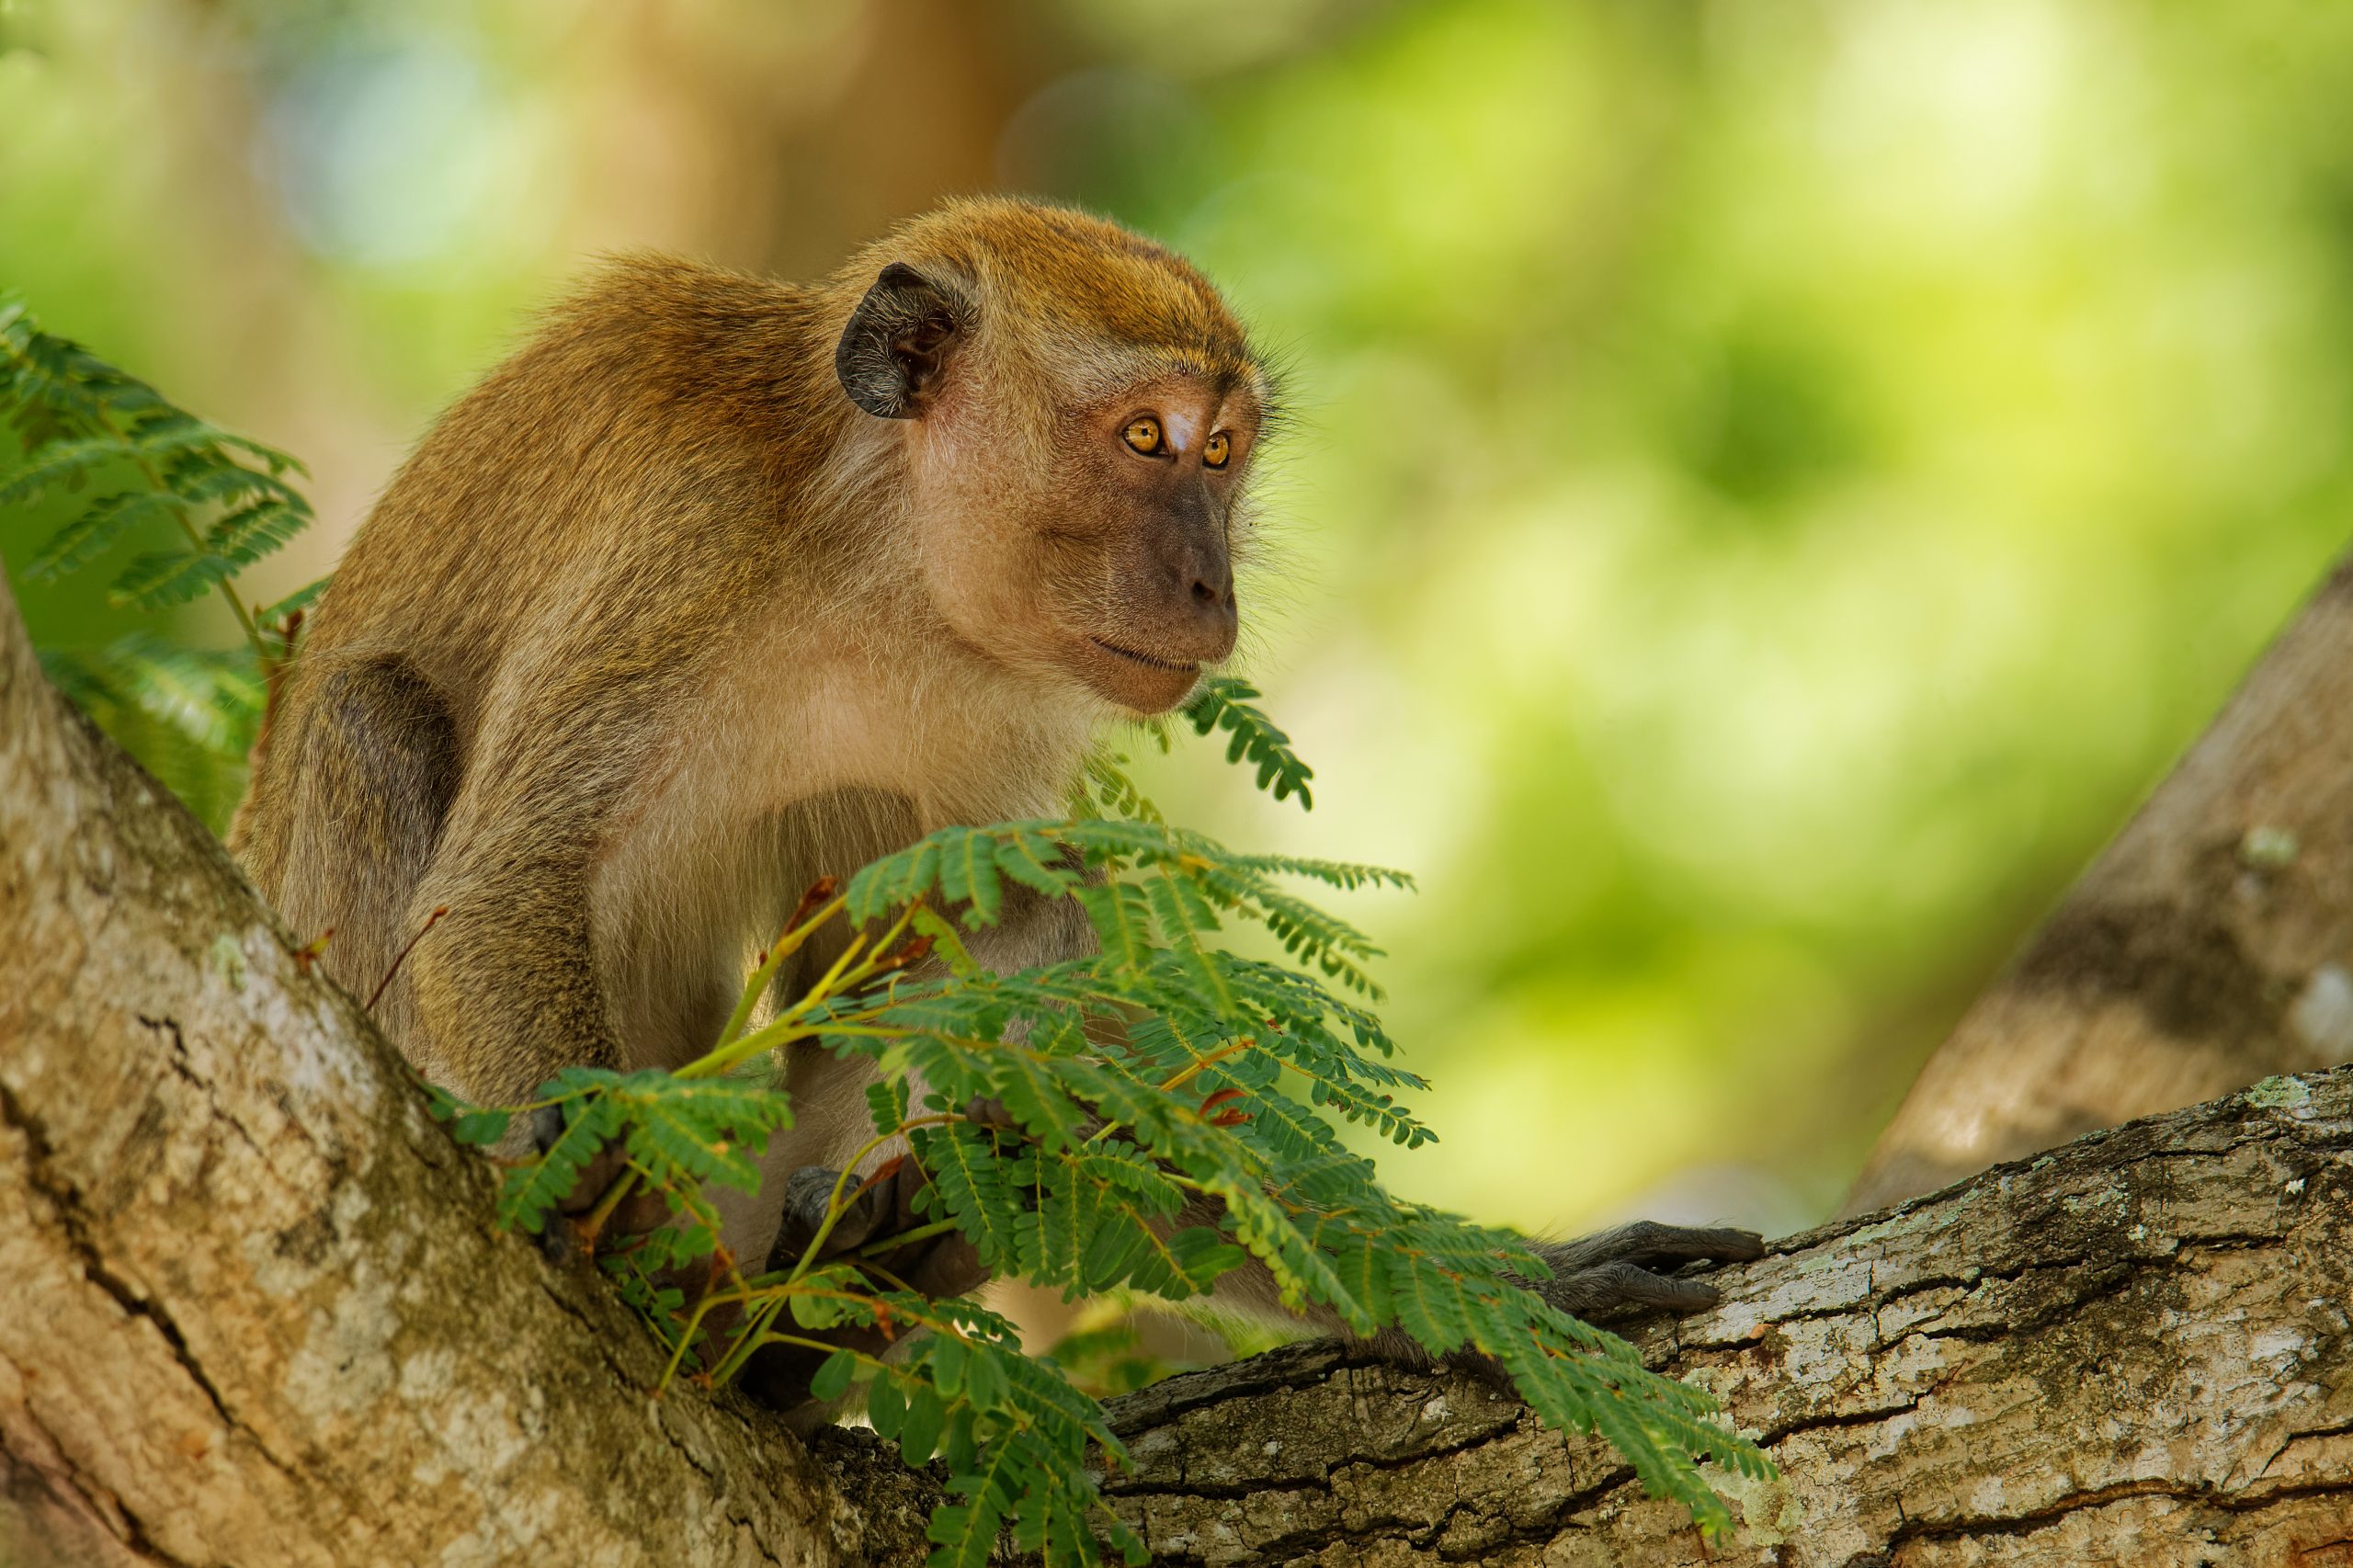 Long-tailed Macaque &#8211; Macaca fascicularis also known as crab-eating macaque, a cercopithecine primate native to Southeast Asia, is referred to as the cynomolgus monkey